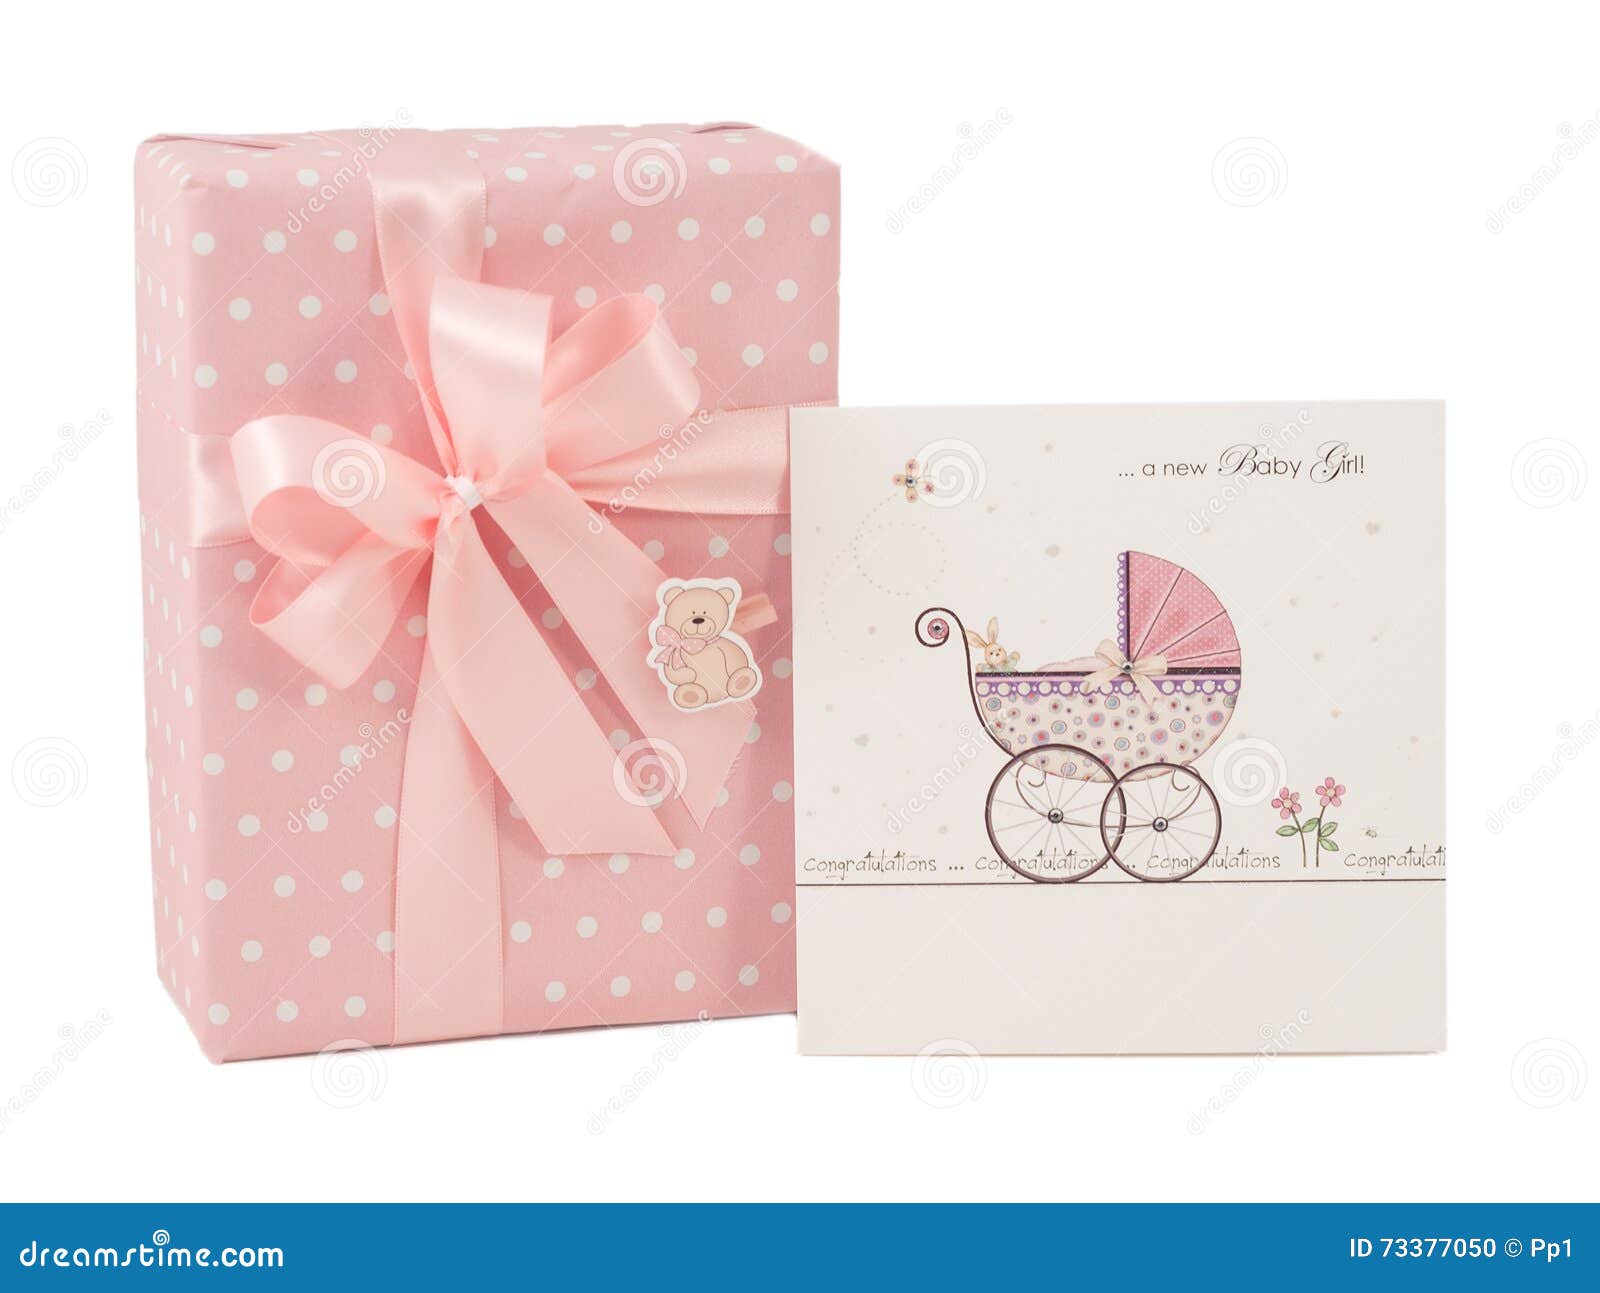 Details about   Cellophane gift wrap 2m x 80 cm-Pink New Baby Birth Girl FREE PULL BOW & CARD 